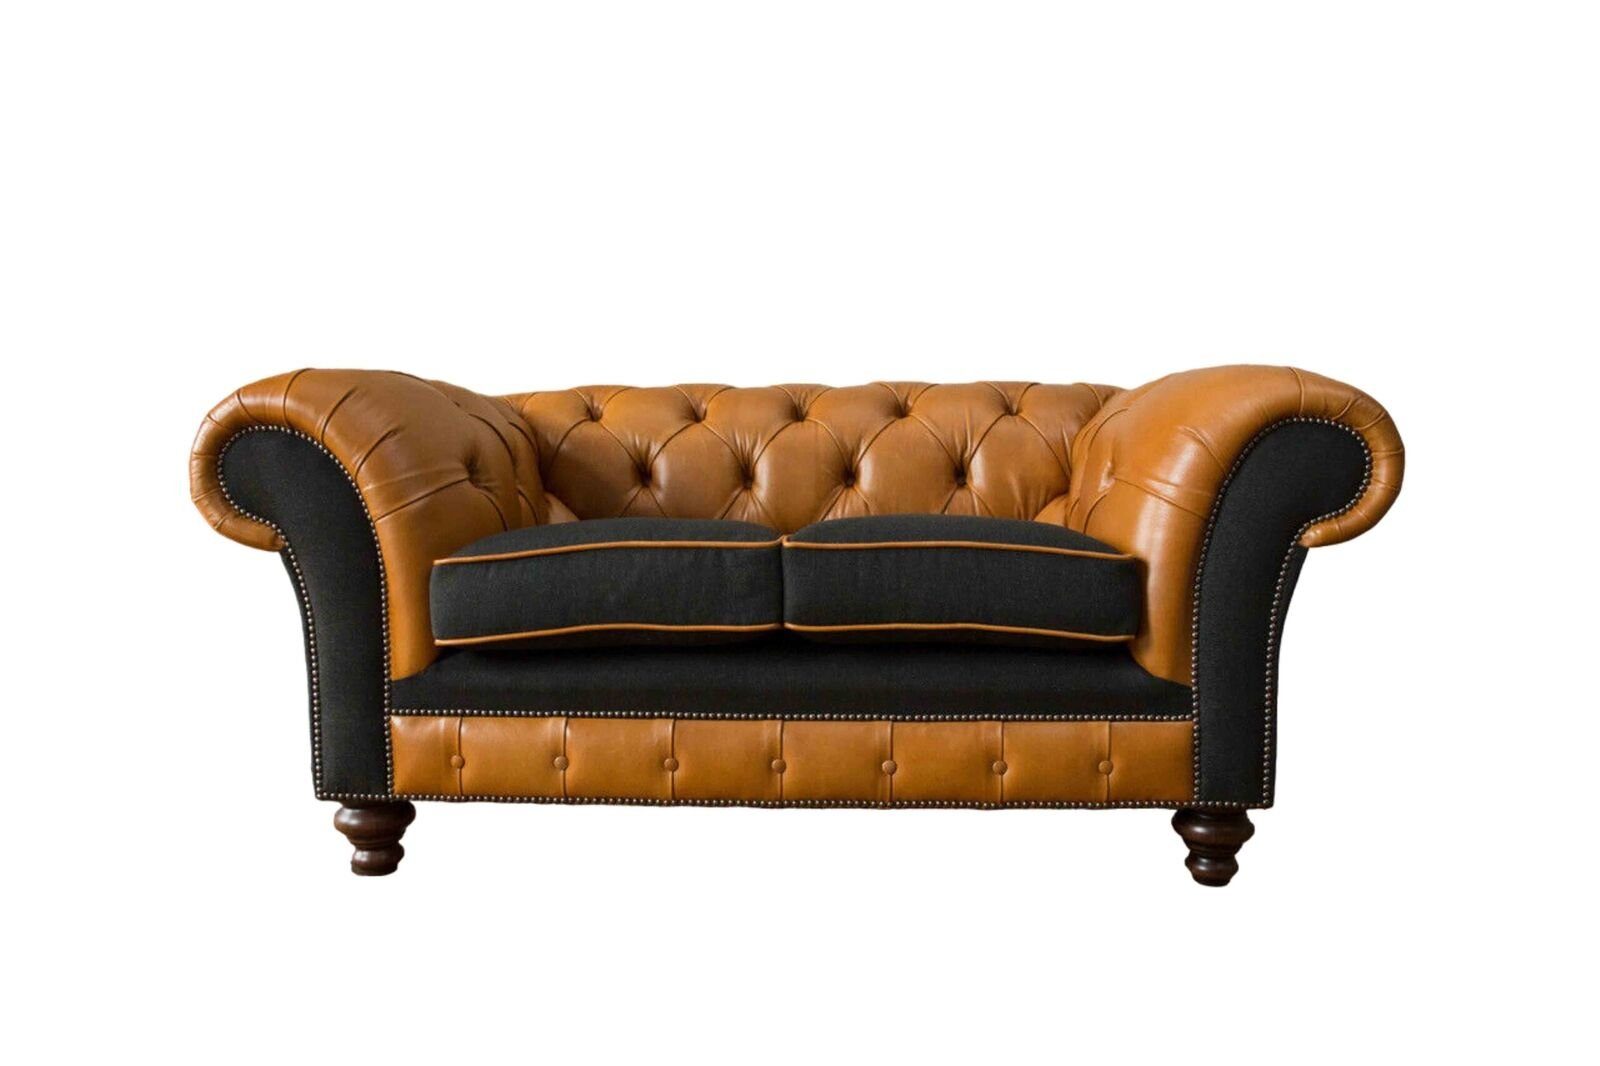 JVmoebel Sofa Chesterfield Ledersofa Sofa Sitzer Made Couch Polster Textil Sofas, In 2 Europe